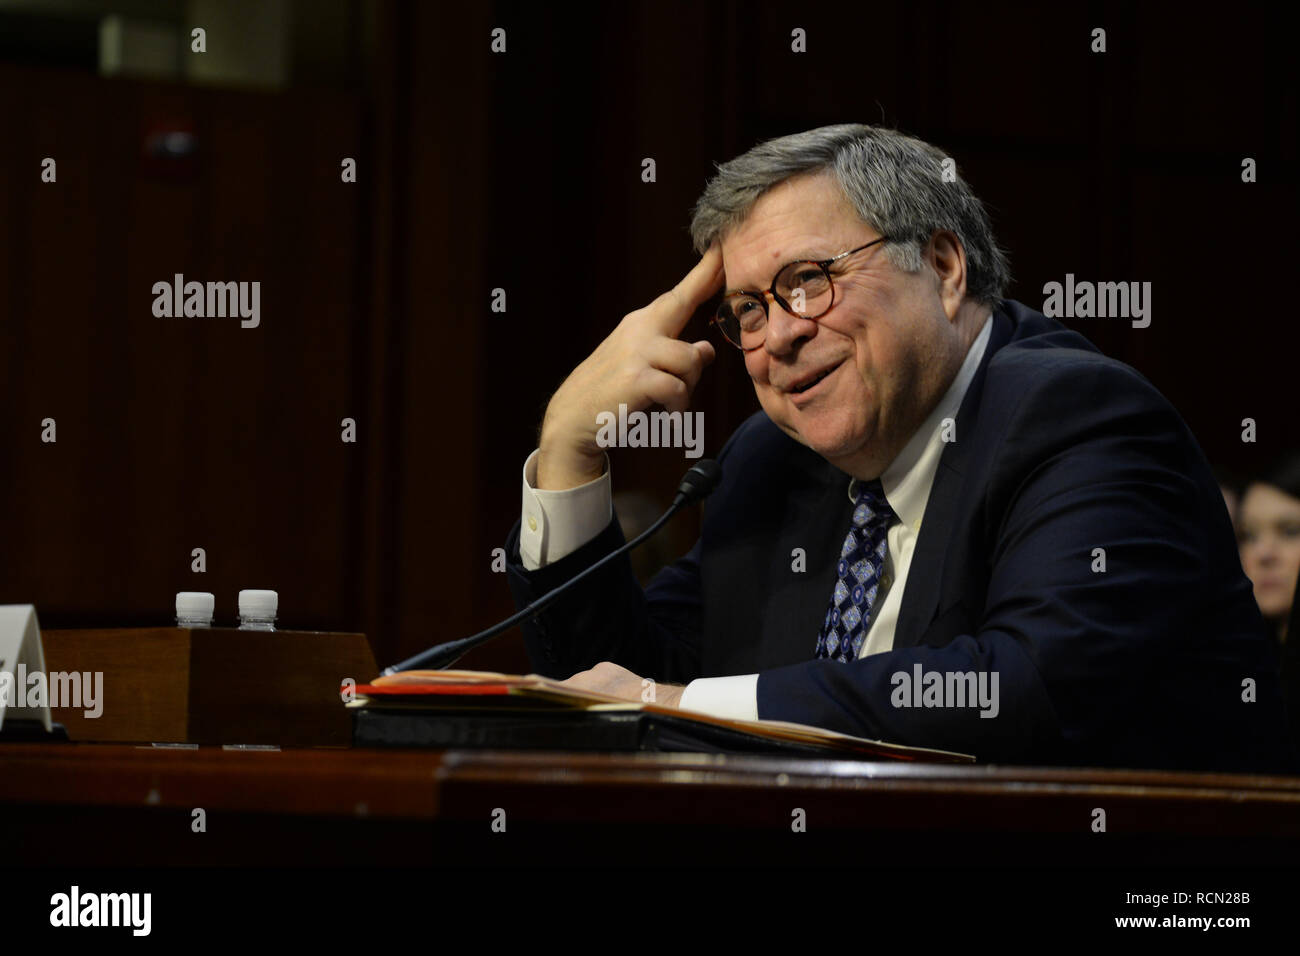 Washington, DC, USA. 15th Jan, 2019. U.S. Attorney General nominee William P. Barr goes through the Senate Judiciary Committee's Confirmation process on Capitol Hill. Credit: Christy Bowe/ZUMA Wire/Alamy Live News Stock Photo